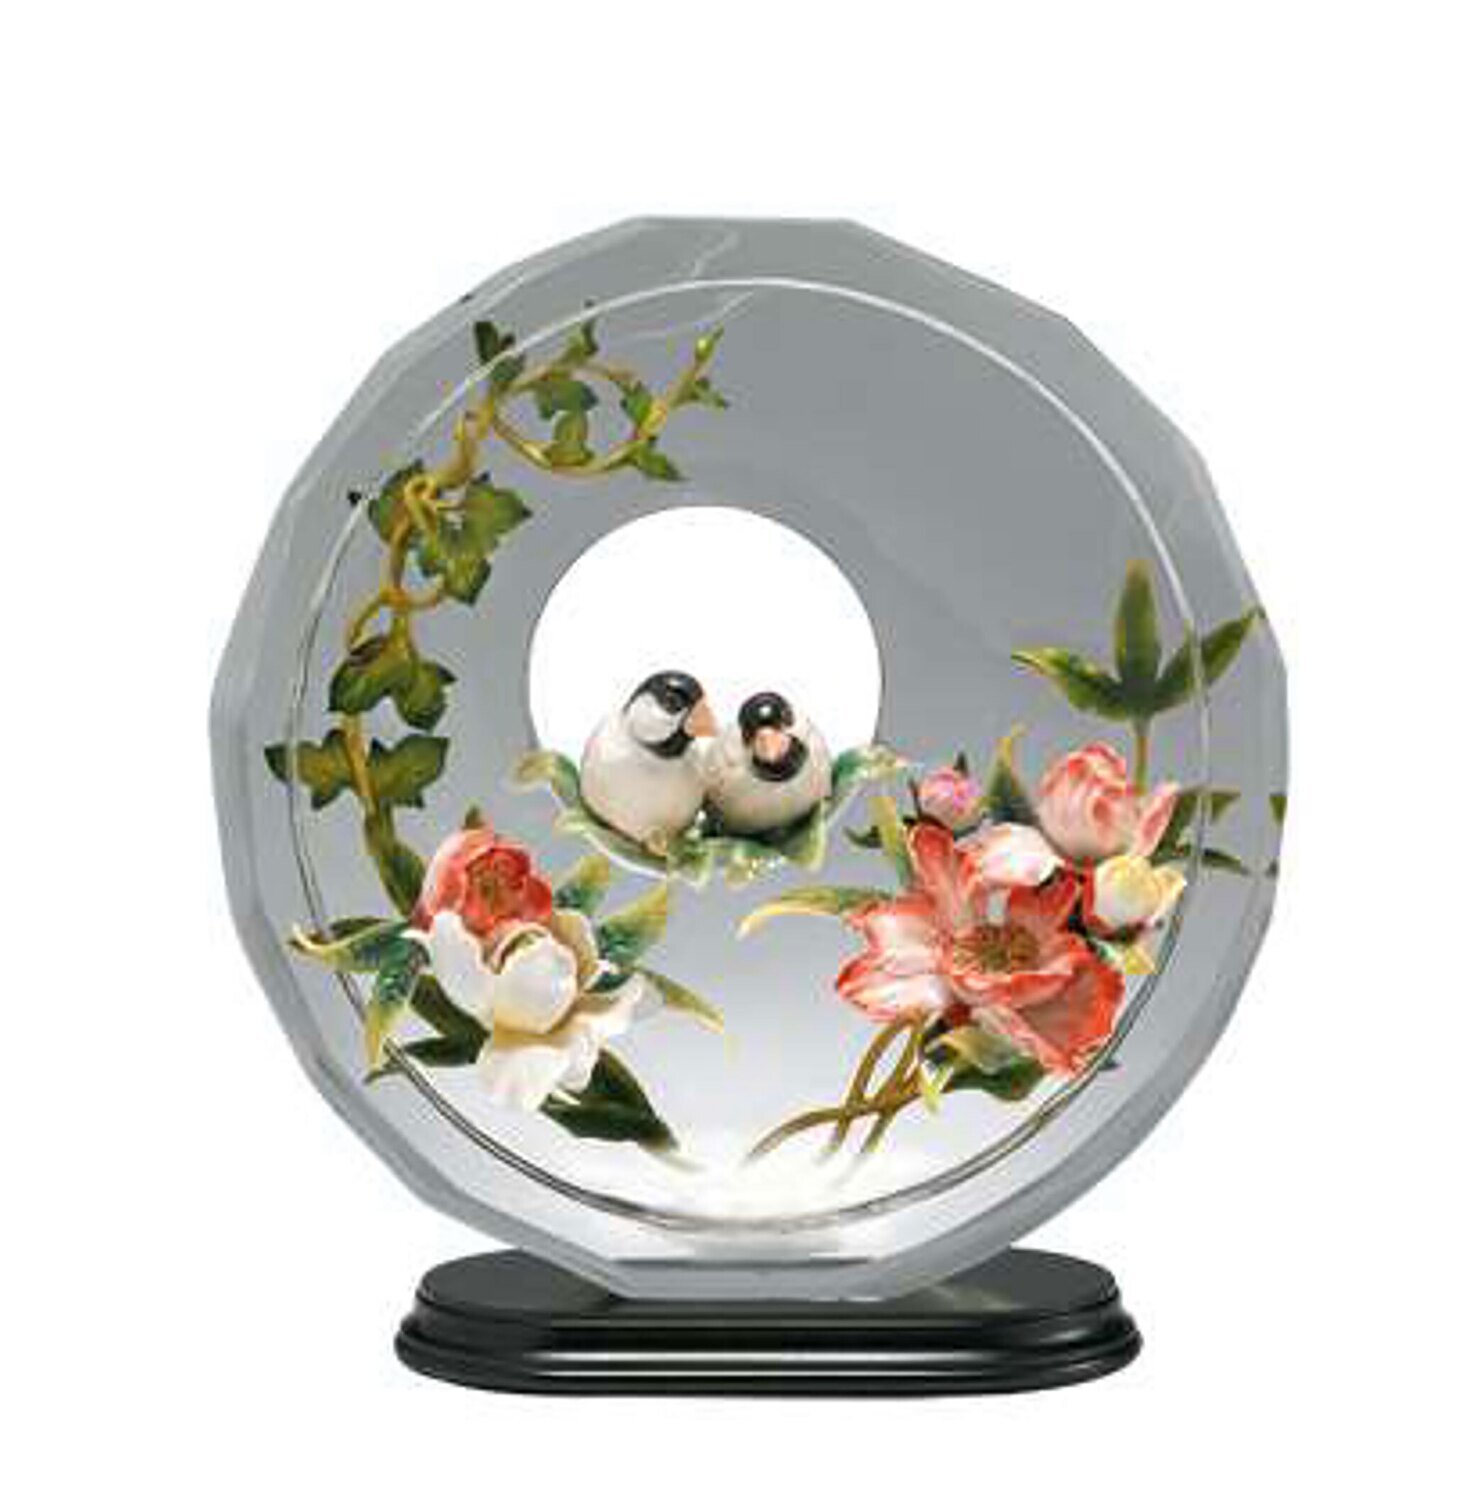 Franz Porcelain Lucite Bl00Ming Flowers and Moon Figurine with Wooden Base Limited Editon of 199 FL00066